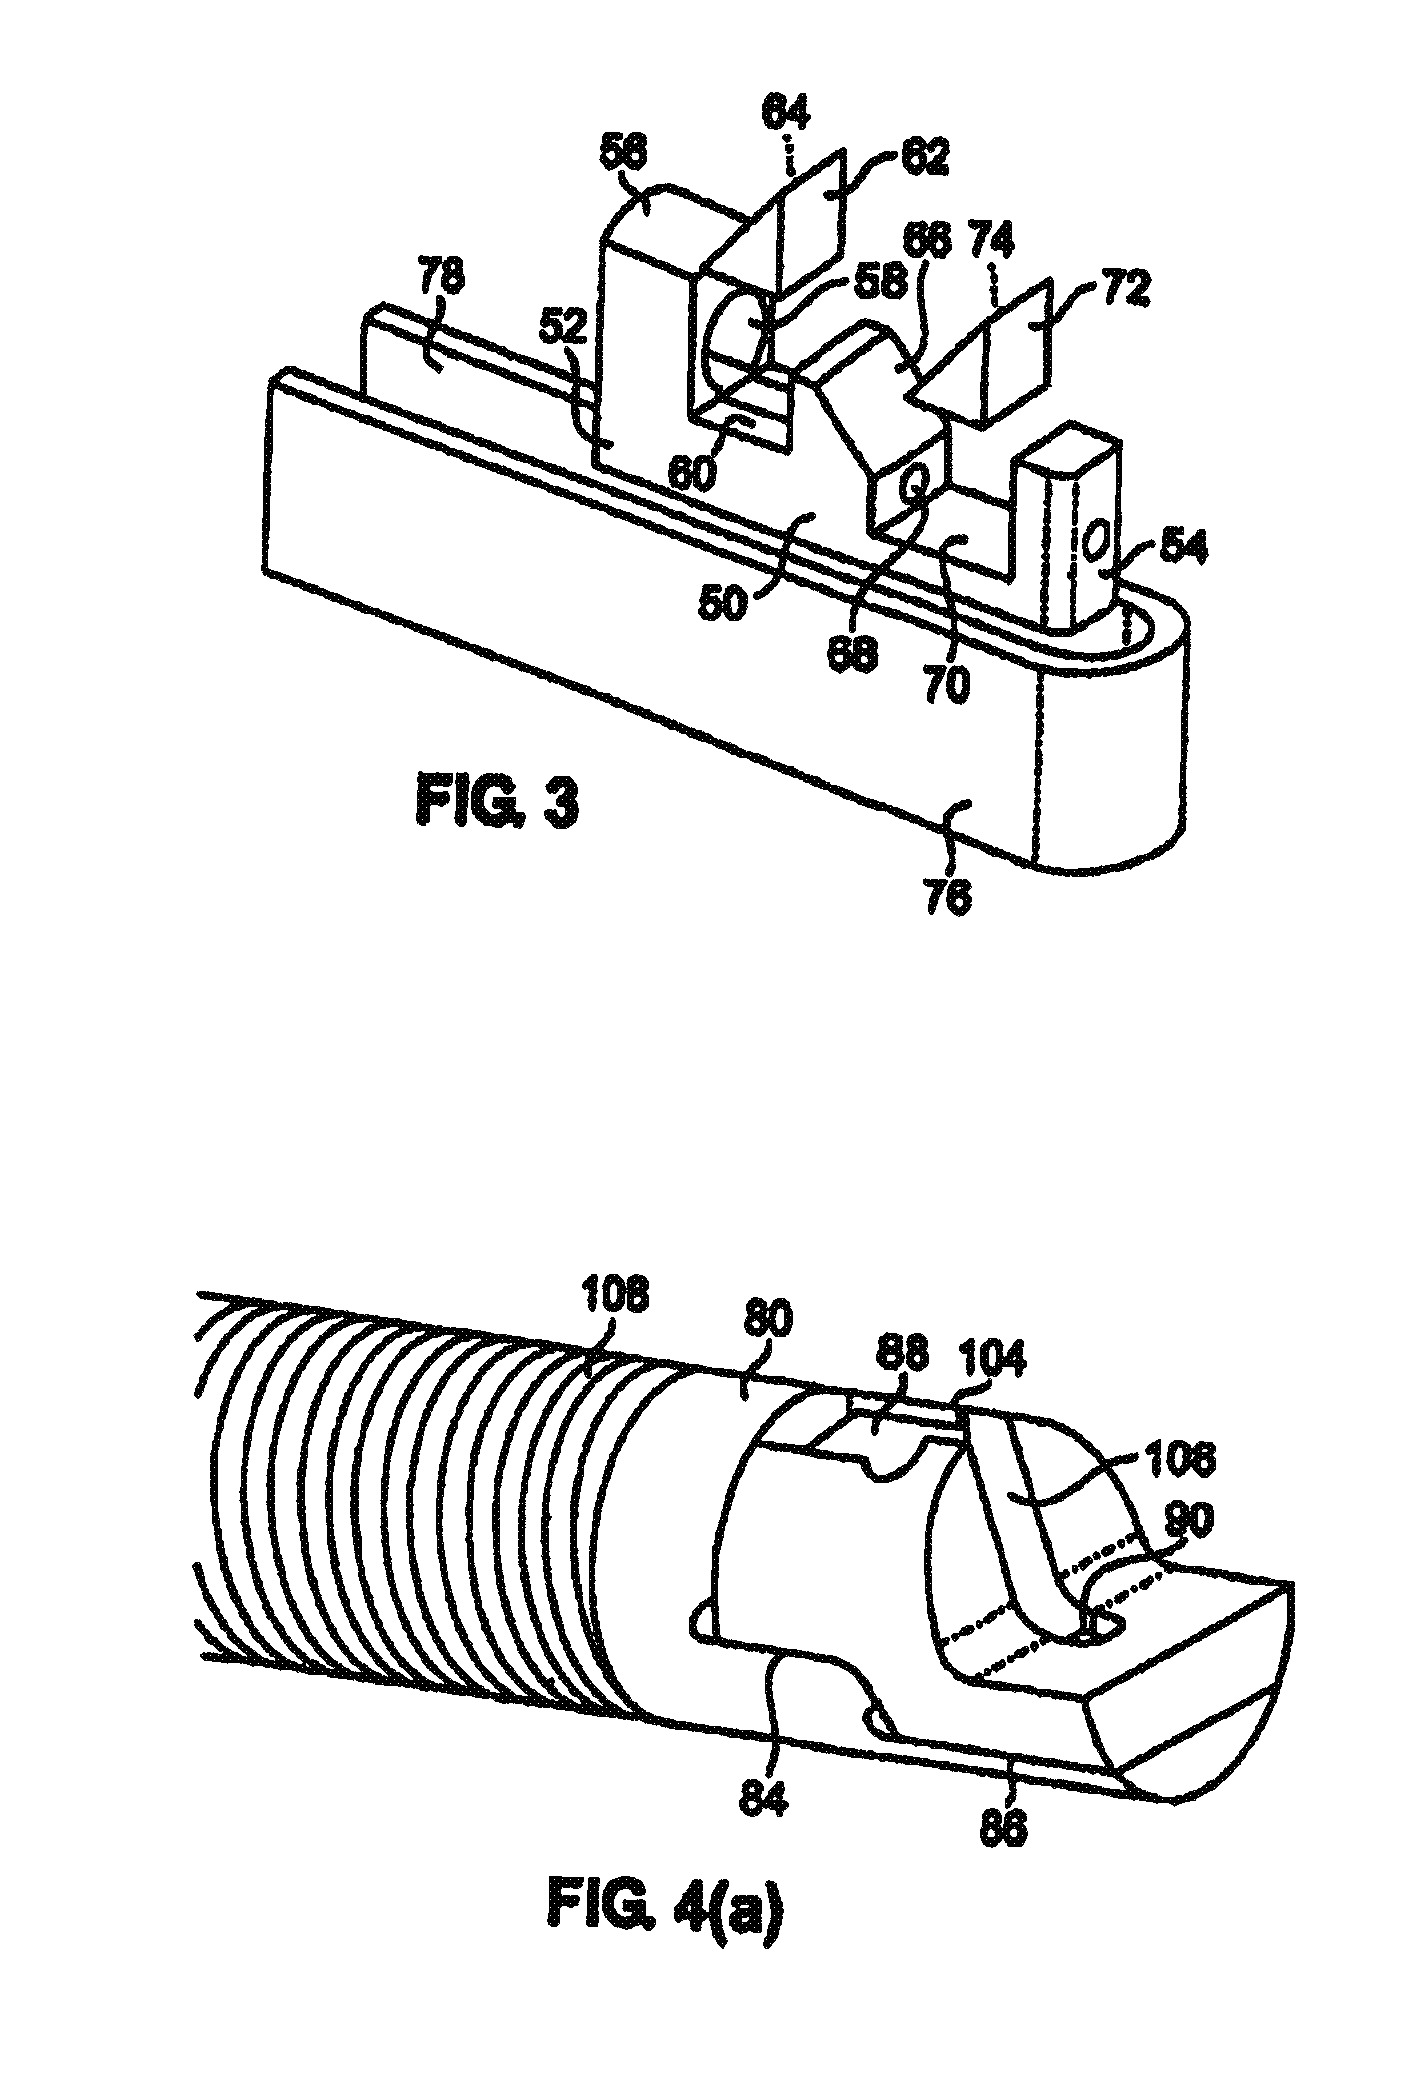 Catheter probe arrangement for tissue analysis by radiant energy delivery and radiant energy collection